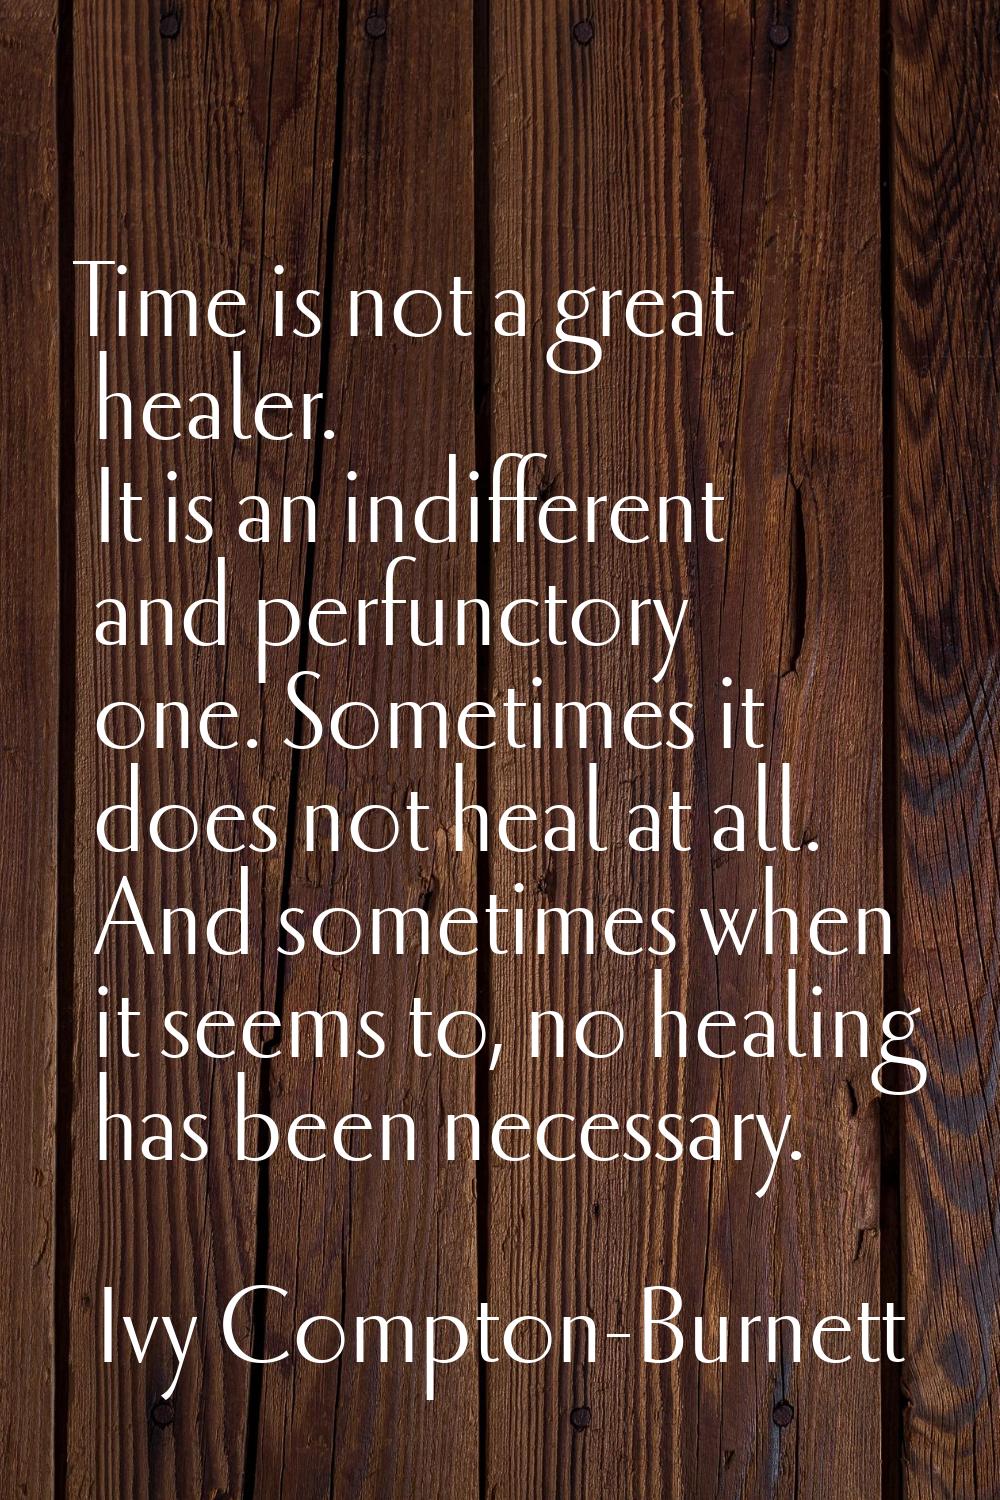 Time is not a great healer. It is an indifferent and perfunctory one. Sometimes it does not heal at